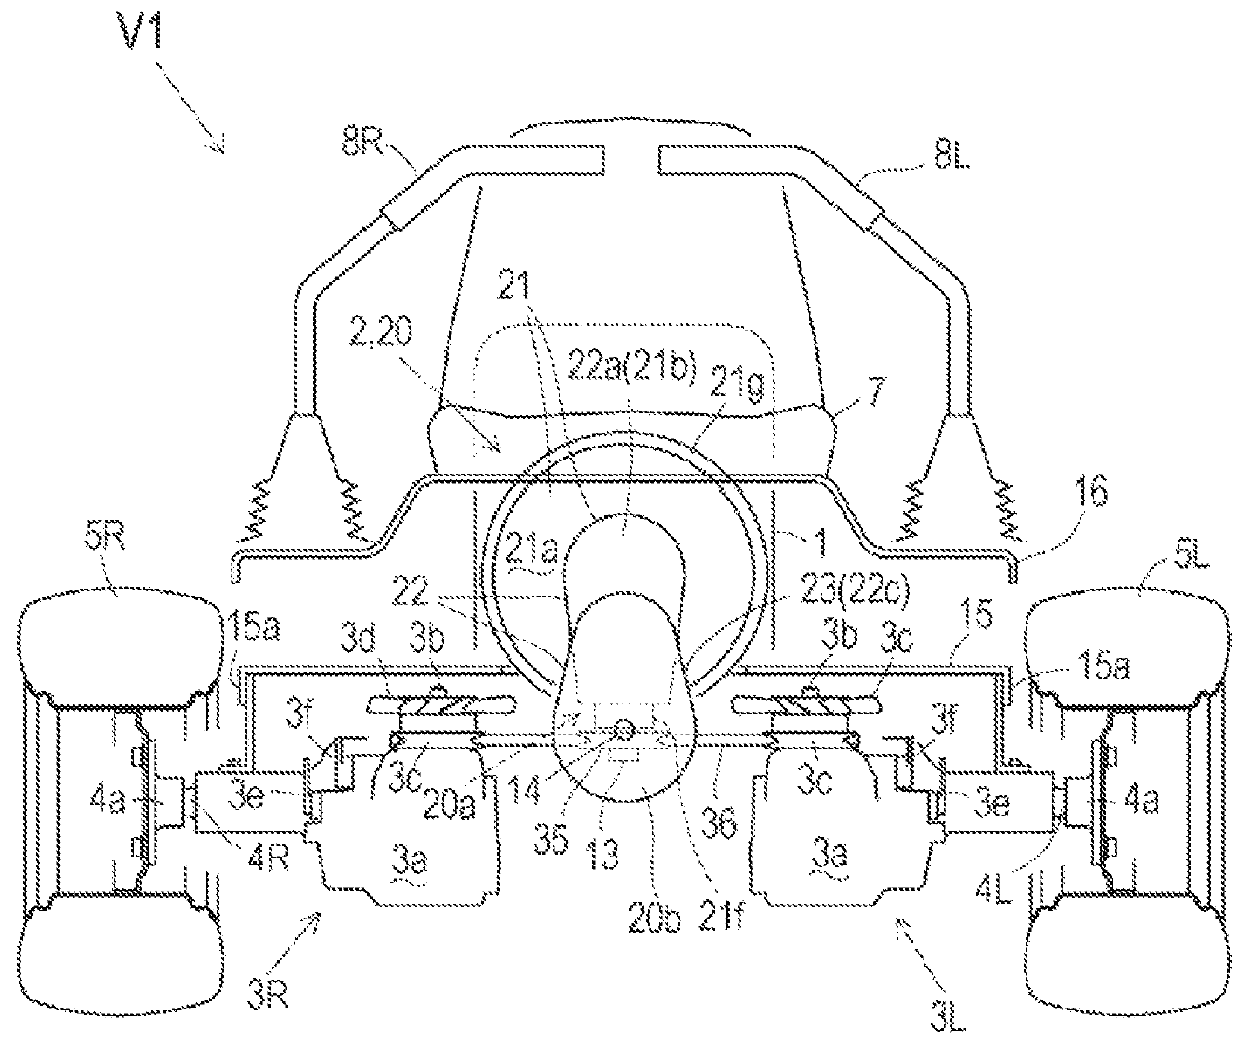 Transmission for working vehicle